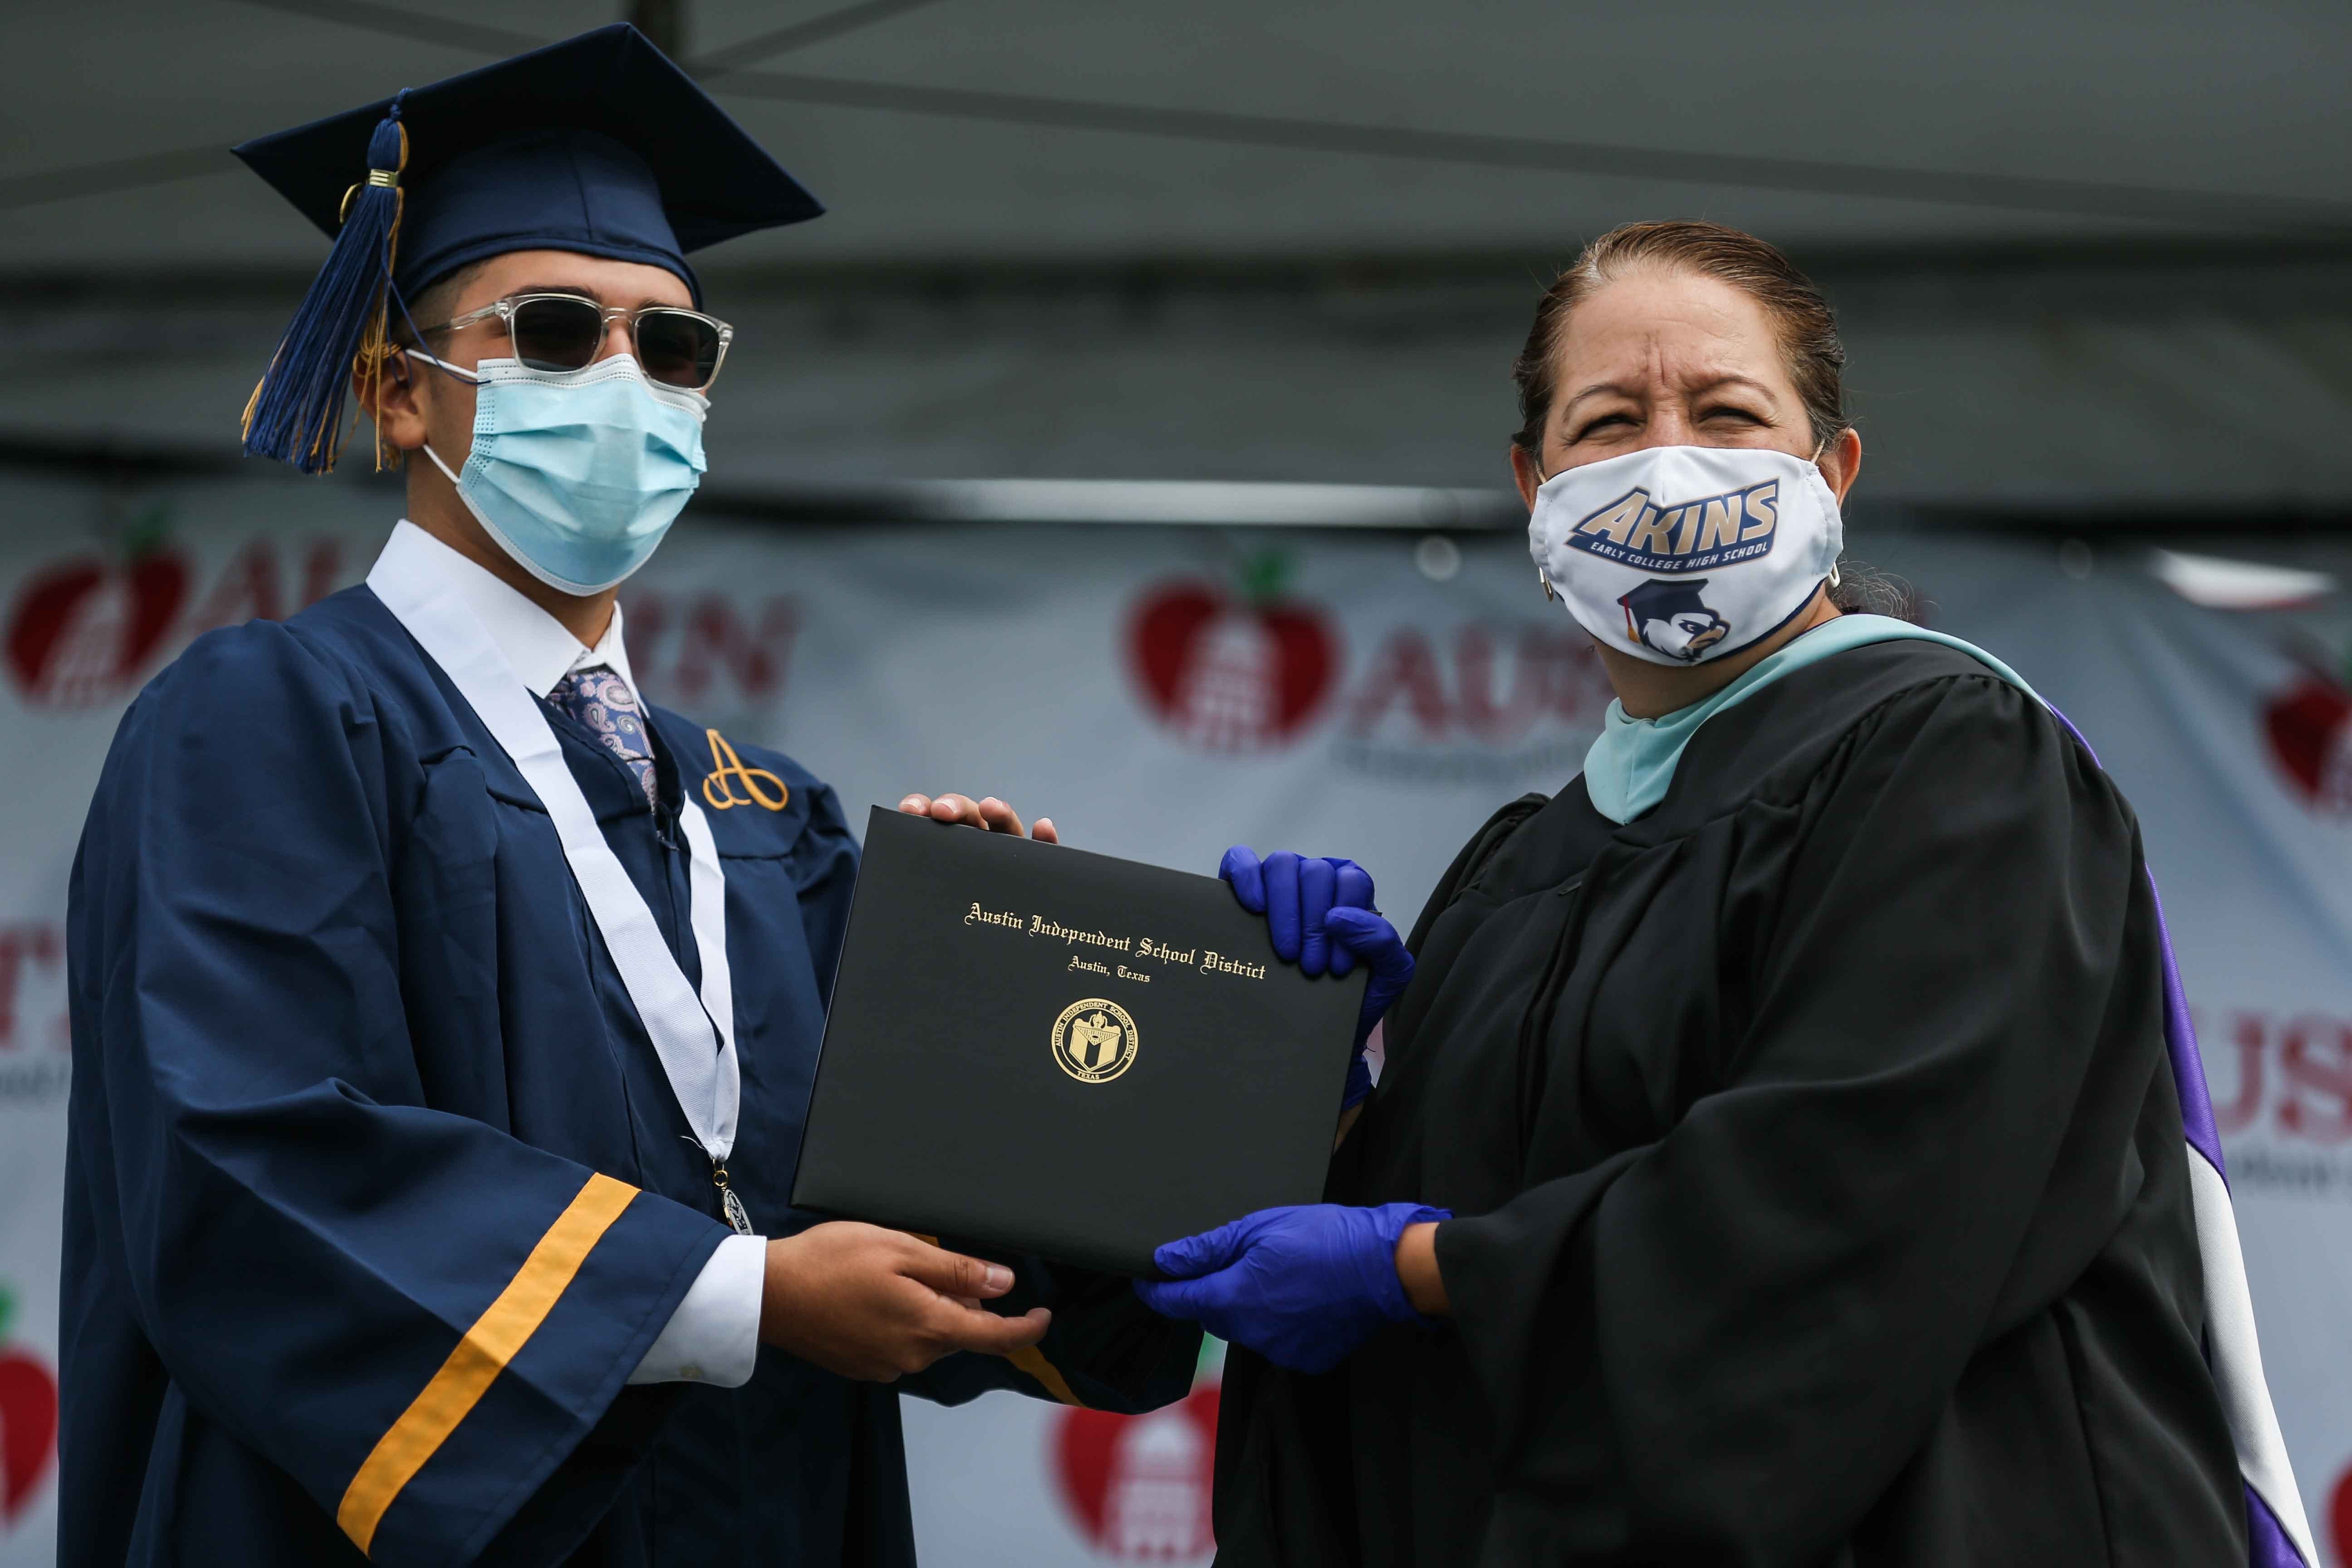 Jorge Garzas Jr. receives his diploma from Principal Tina Salazar at the Toney Burger Center during the graduation ceremony by Akins High School in Austin on Tuesday, June 23, 2020.